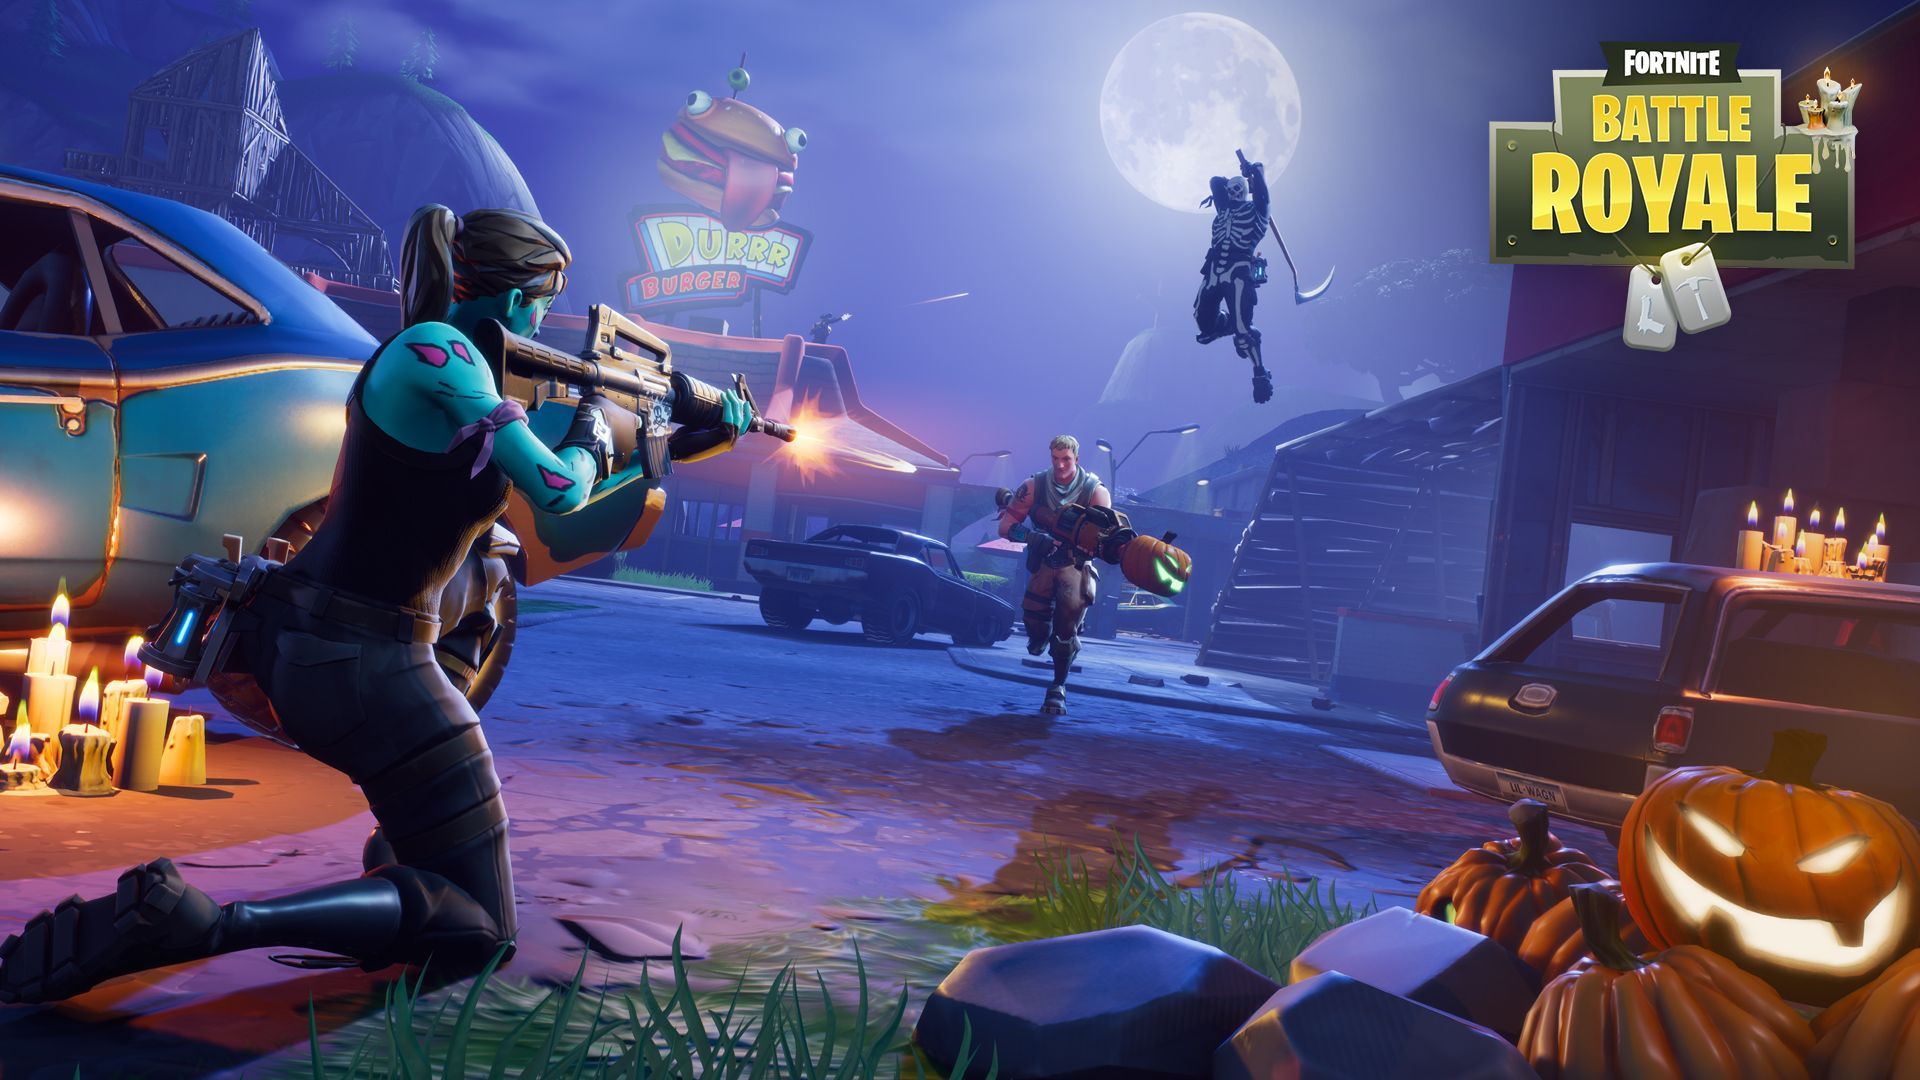 Cool Fornite Battle Royale Wallpapers